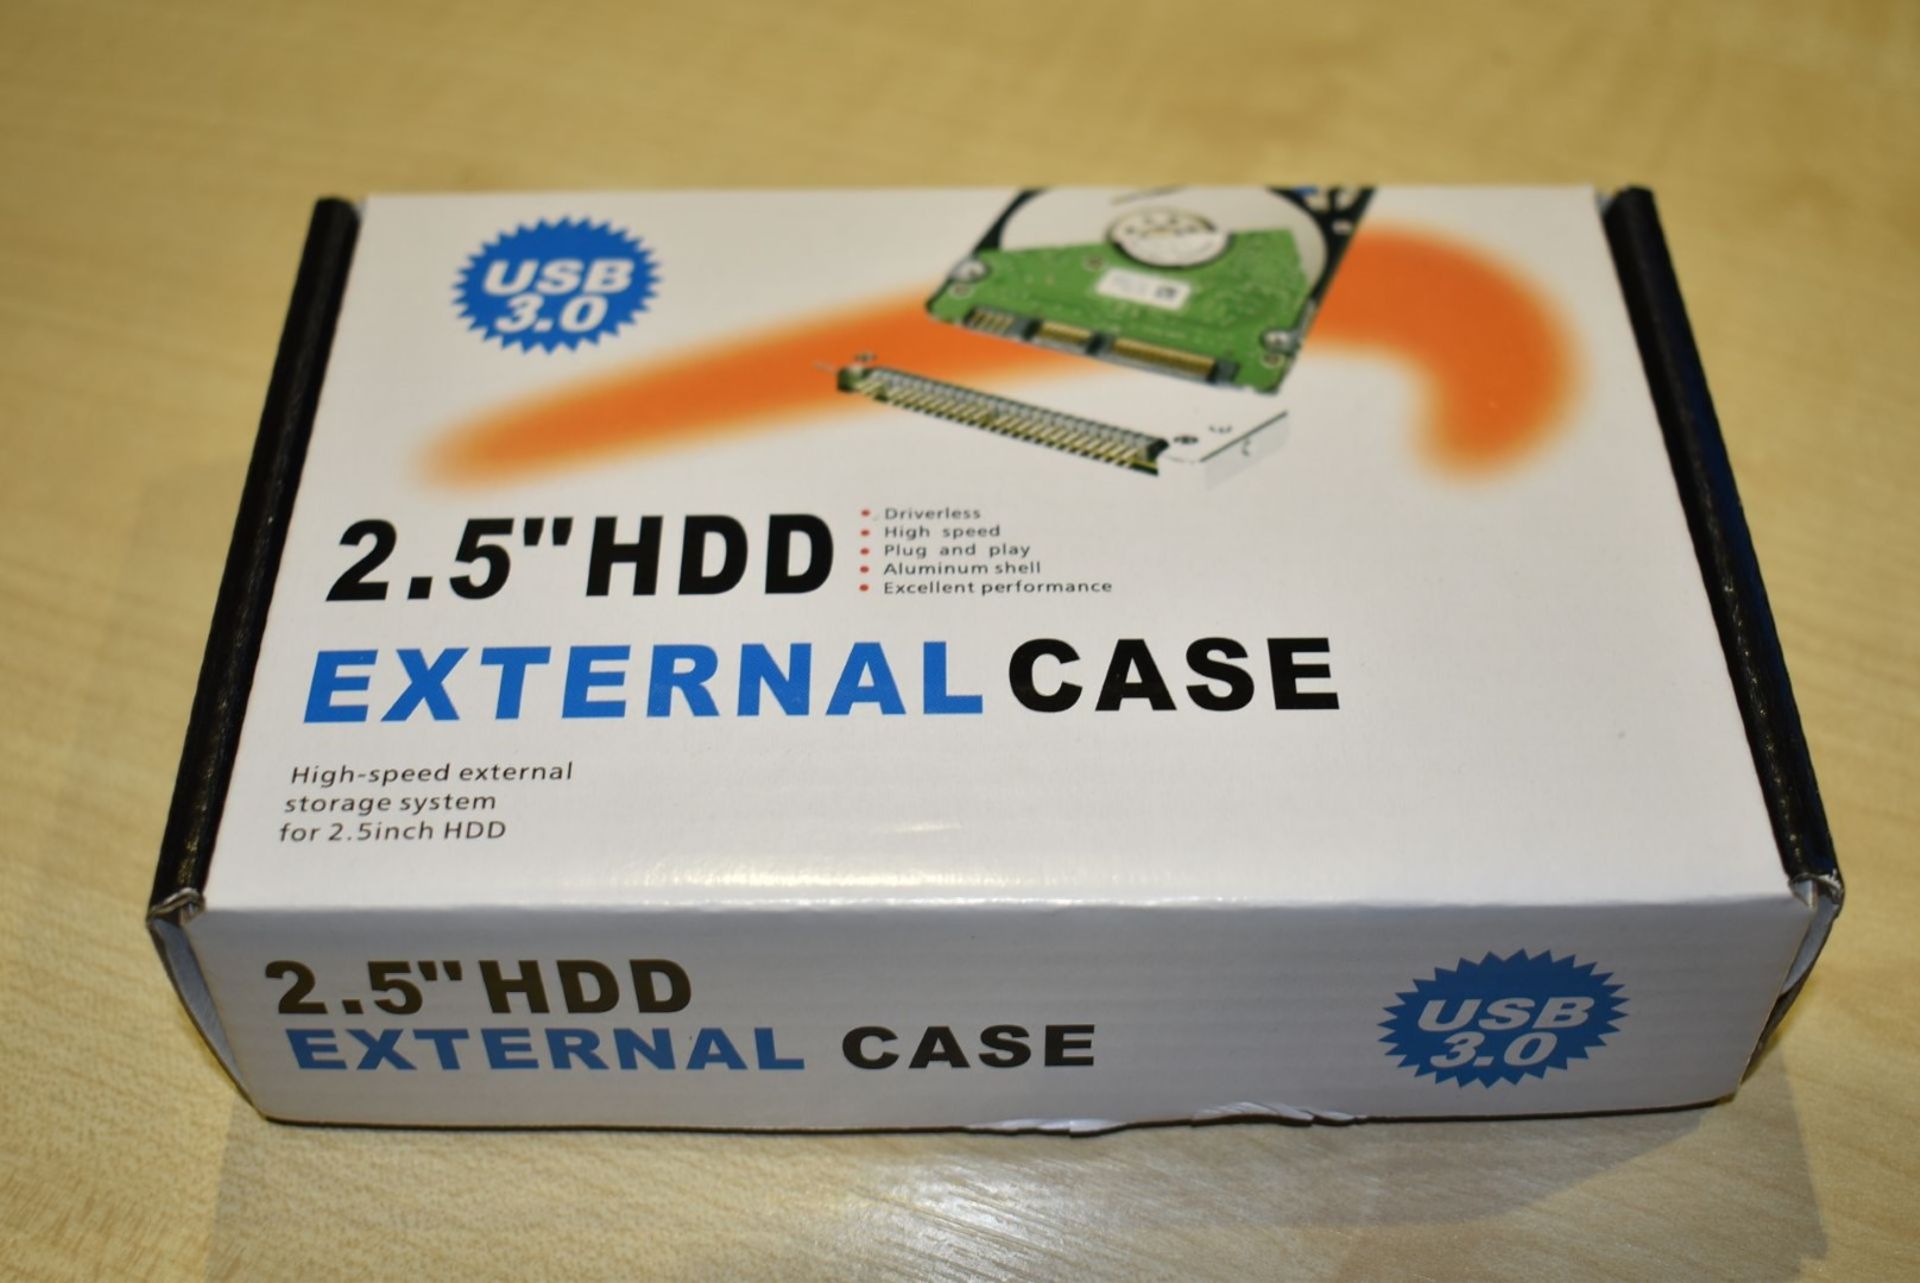 1 x External 500gb Hard Drive - Fast USB 3.0 External Drive With Aluminum Case, Carry Pouch and - Image 4 of 4